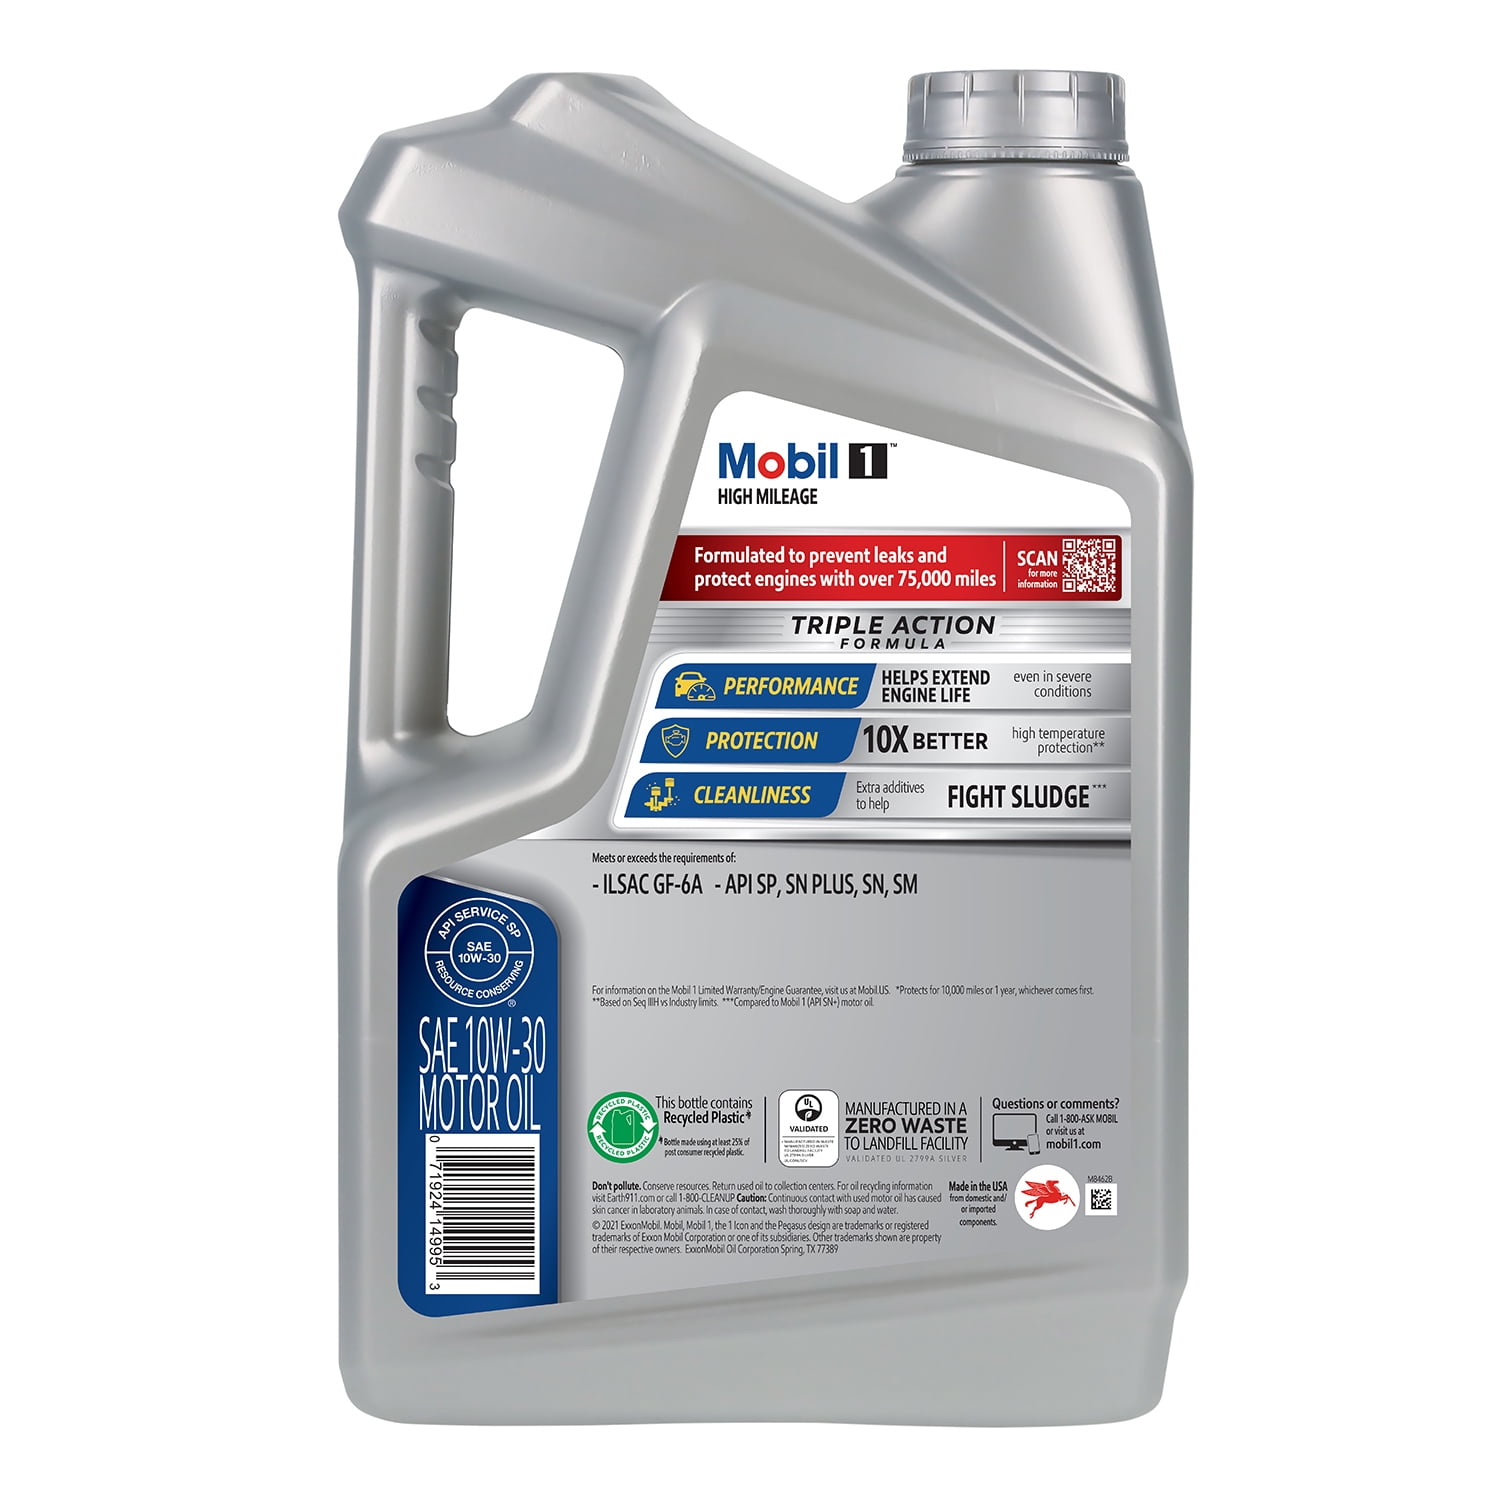 Mobil 1 High Mileage Full Synthetic Motor Oil 10W-30, 5 qt (3 Pack) - 3